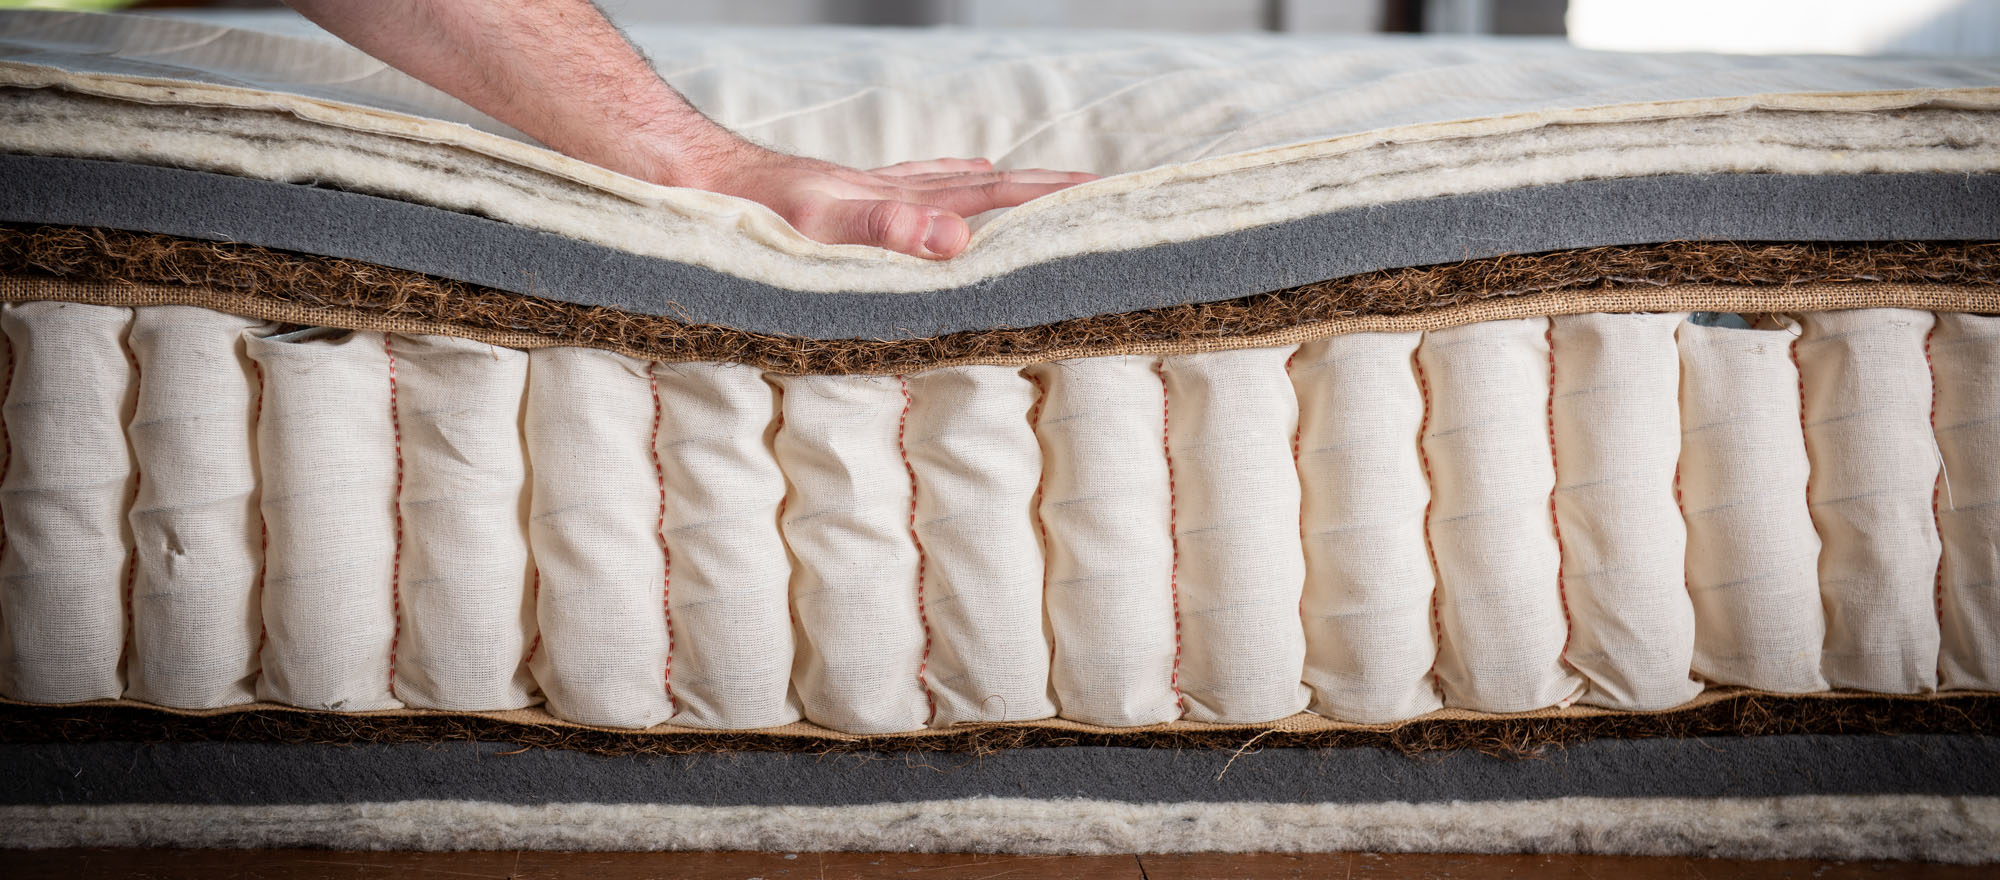 How do I know which mattress is right for me?